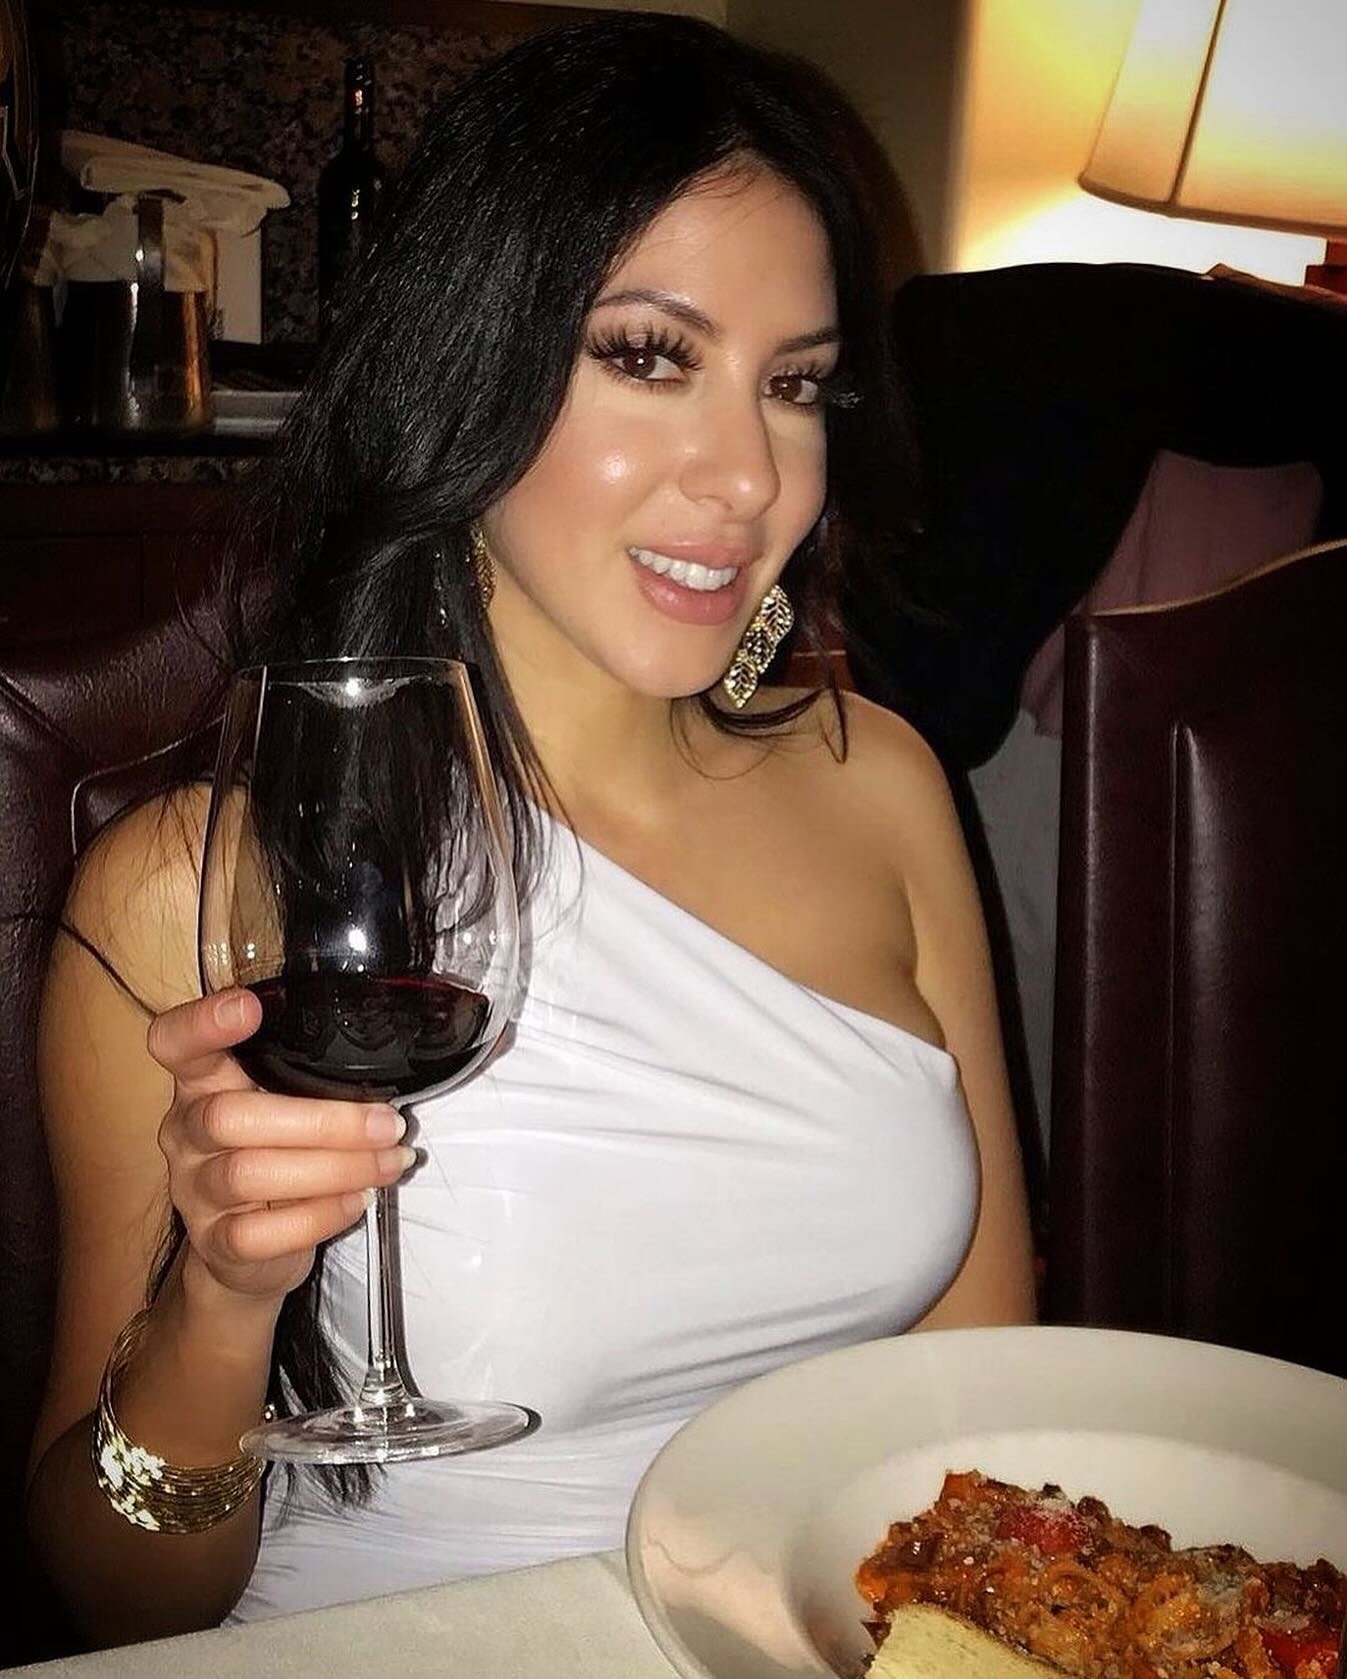 Raise a glass and embrace the beauty of Sunday evenings at BiCE Ristorante with our lovely Bella Donna. 🍷✨ #lavita&egrave;bella 
As she savors her wine, she&rsquo;s preparing for the new week ahead. ✨🇮🇹

We&rsquo;re open daily from 5:30 PM, and we